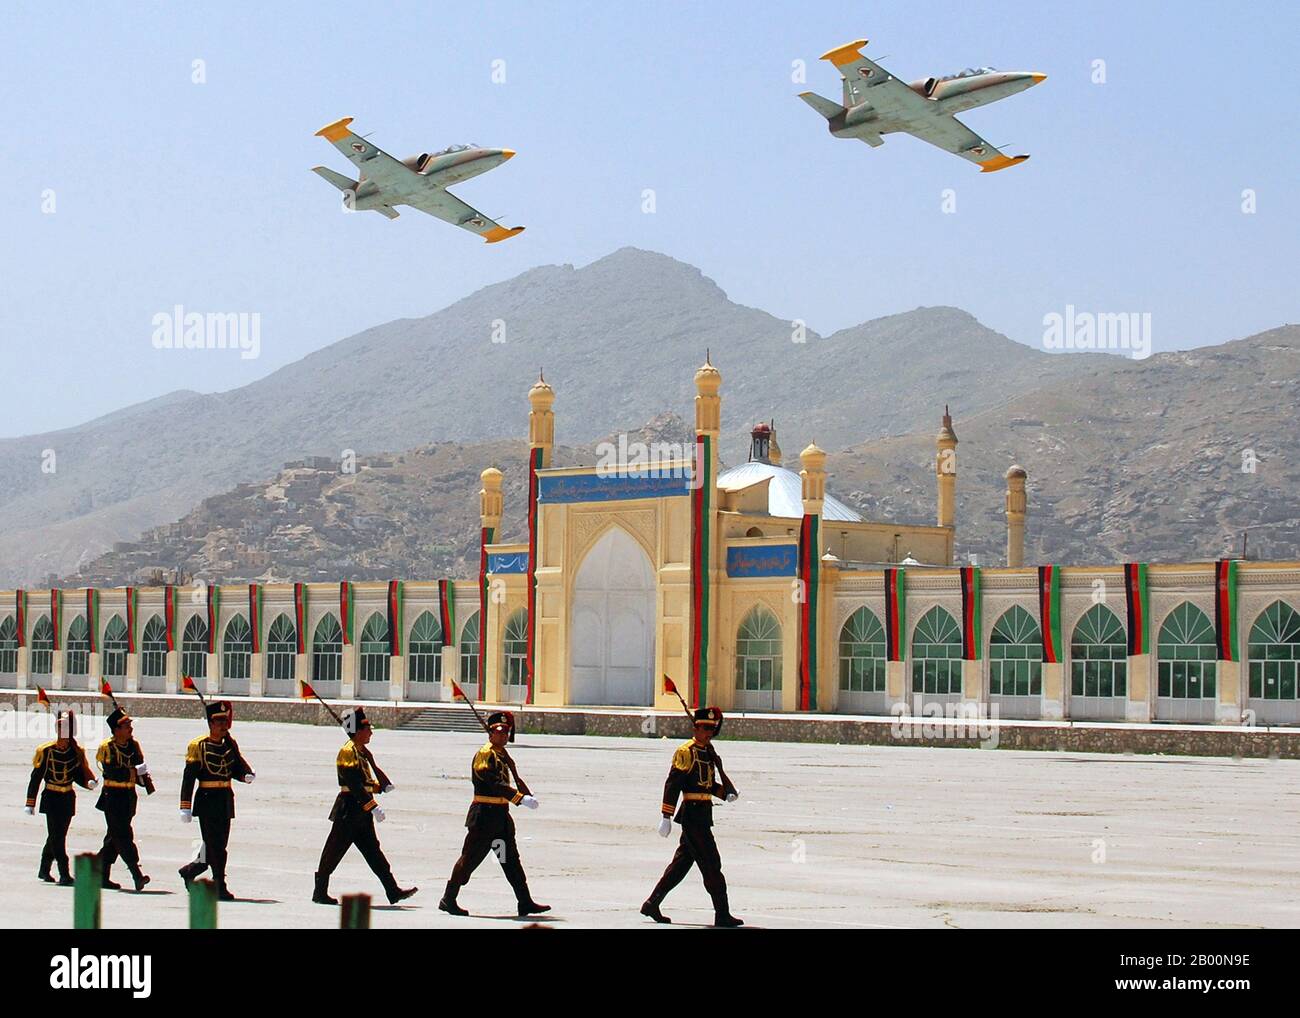 Afghanistan: Afghan Air Force jets pass in review during a parade commemorating the 15th anniversary of the Mujahideen victory. This occasion marks the capture of Kabul from the communist regime on April 28, 1992. Photo by David Votroubek, 2007.  The Soviet War in Afghanistan was a nine-year conflict involving the Soviet Union, supporting the Marxist government of the Democratic Republic of Afghanistan against the indigenous Afghan Mujahideen and foreign ‘Arab–Afghan’ volunteers. The mujahideen found other support from a variety of sources including the US, Saudi Arabia, the UK and China. Stock Photo